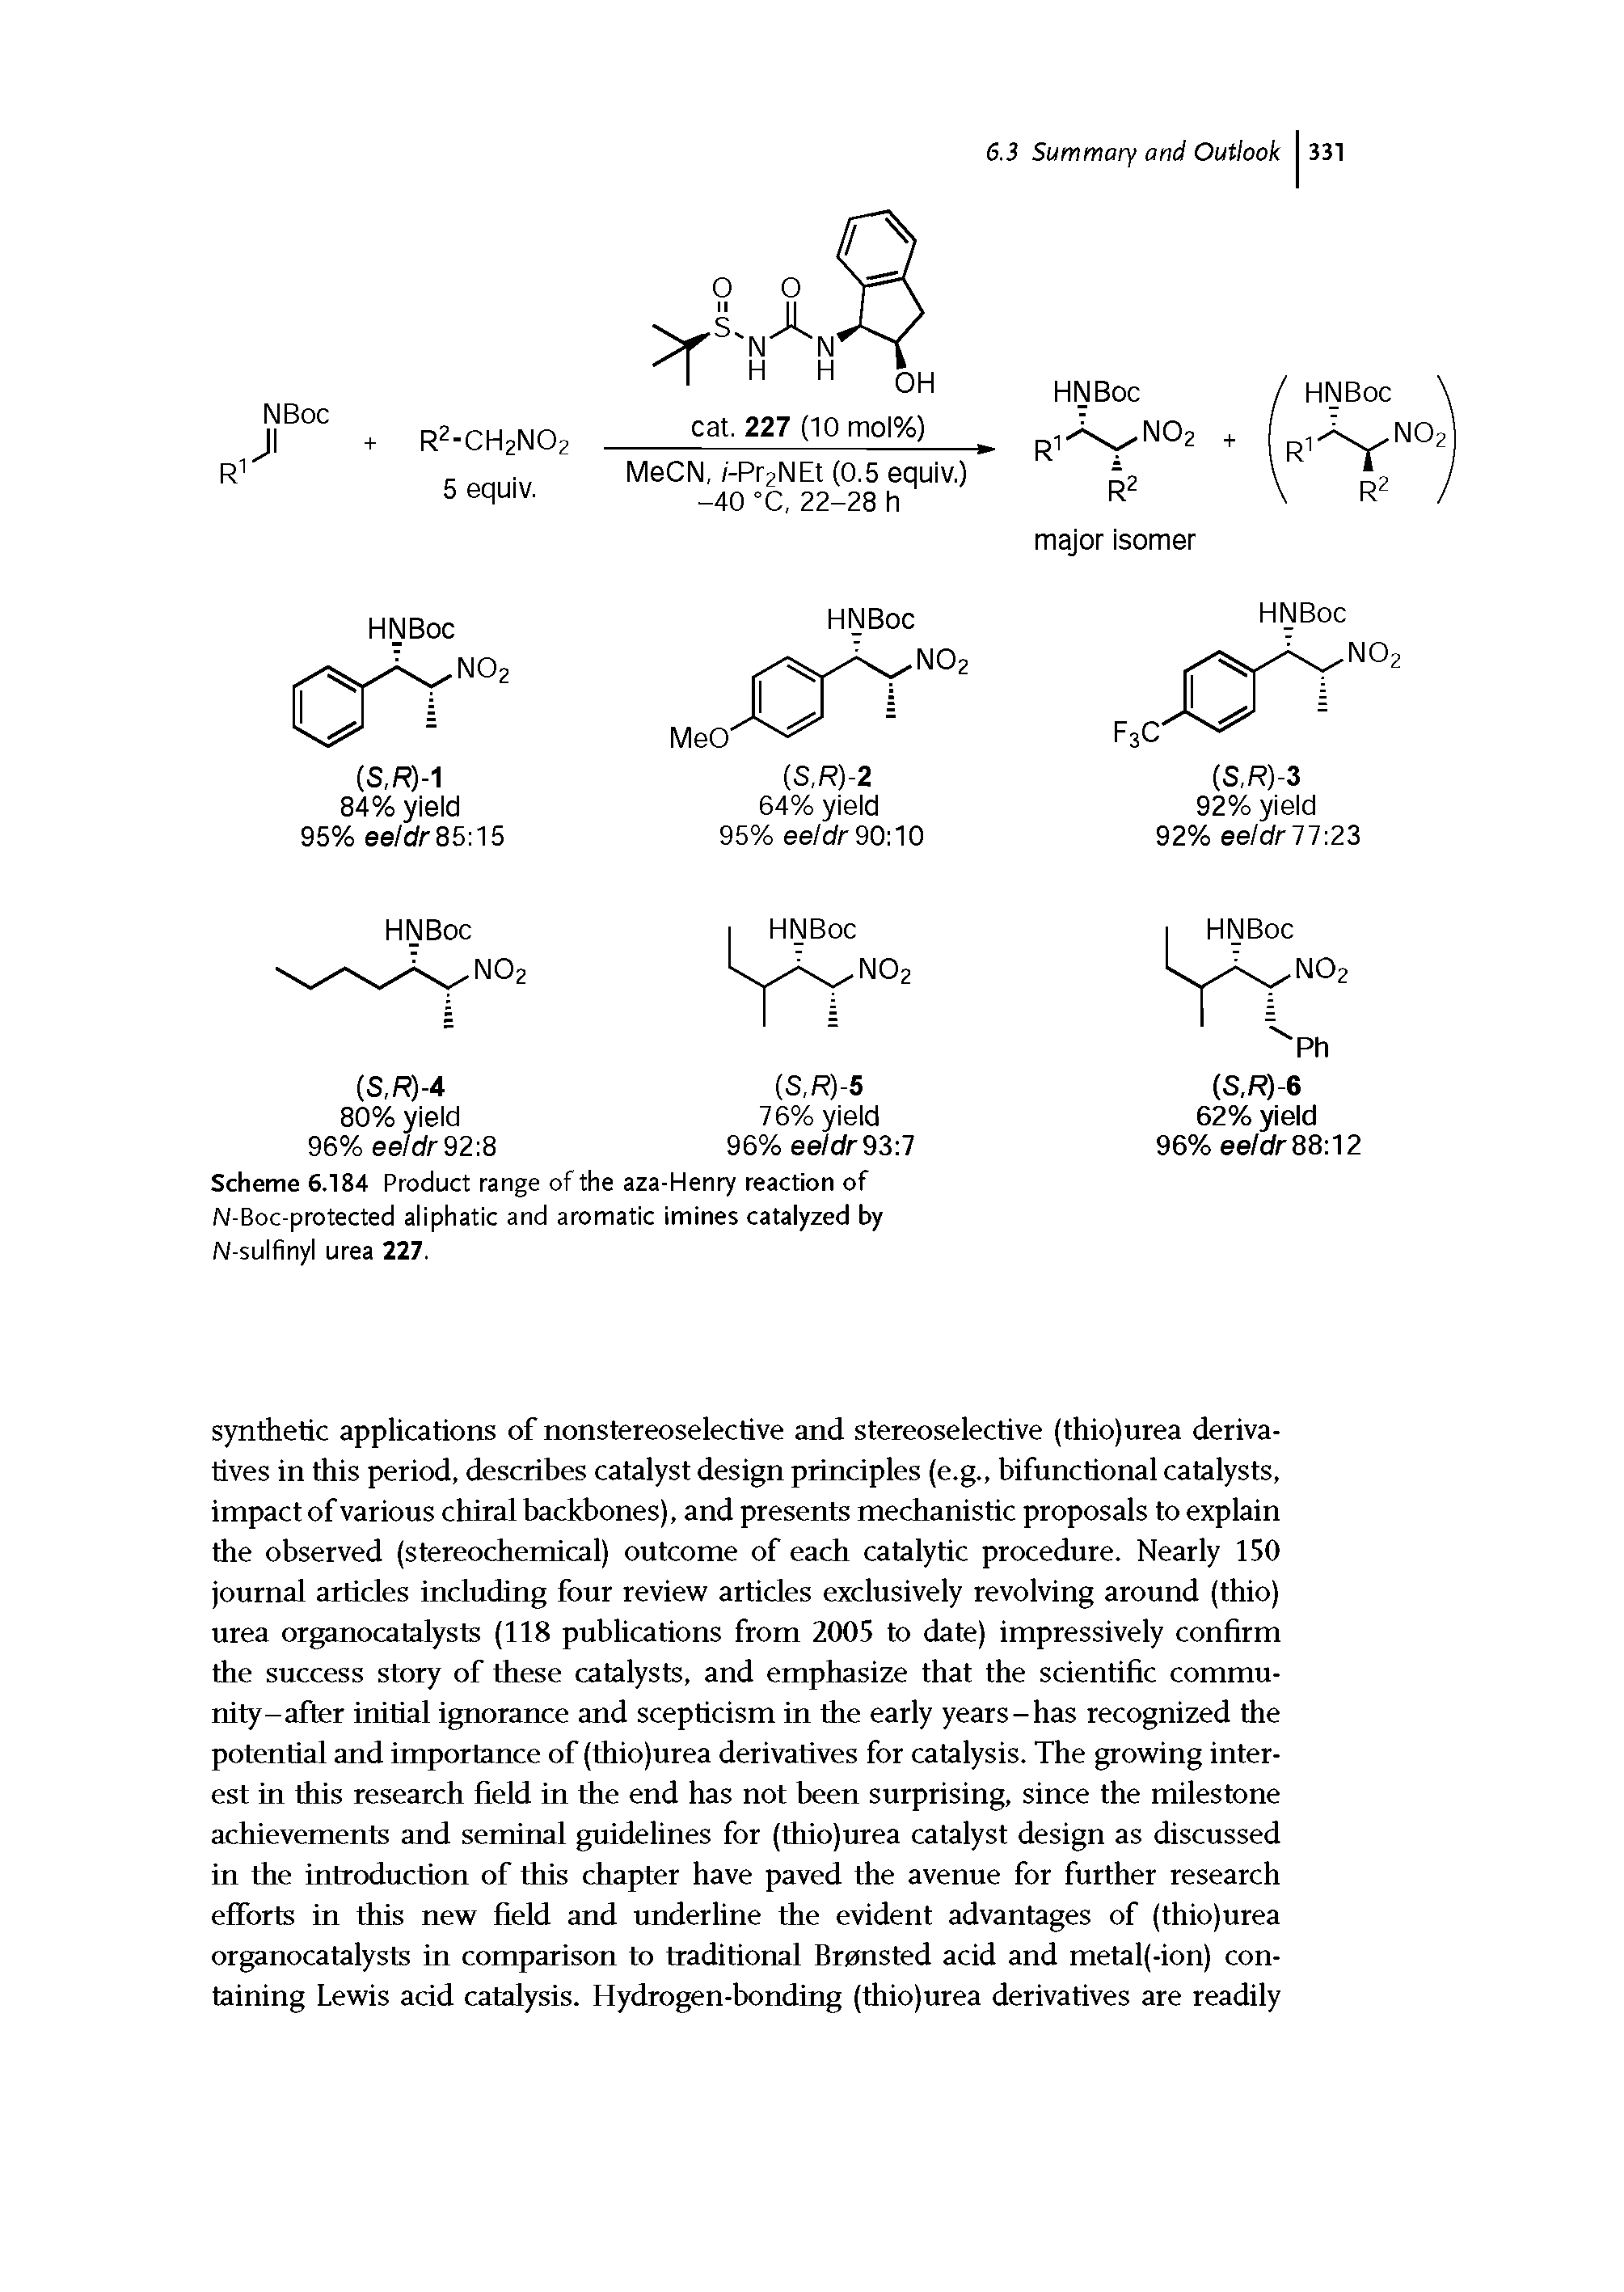 Scheme 6.184 Product range of the aza-Henry reaction of N-Boc-protected aiiphatic and aromatic imines catalyzed by N-suifinyi urea 227.